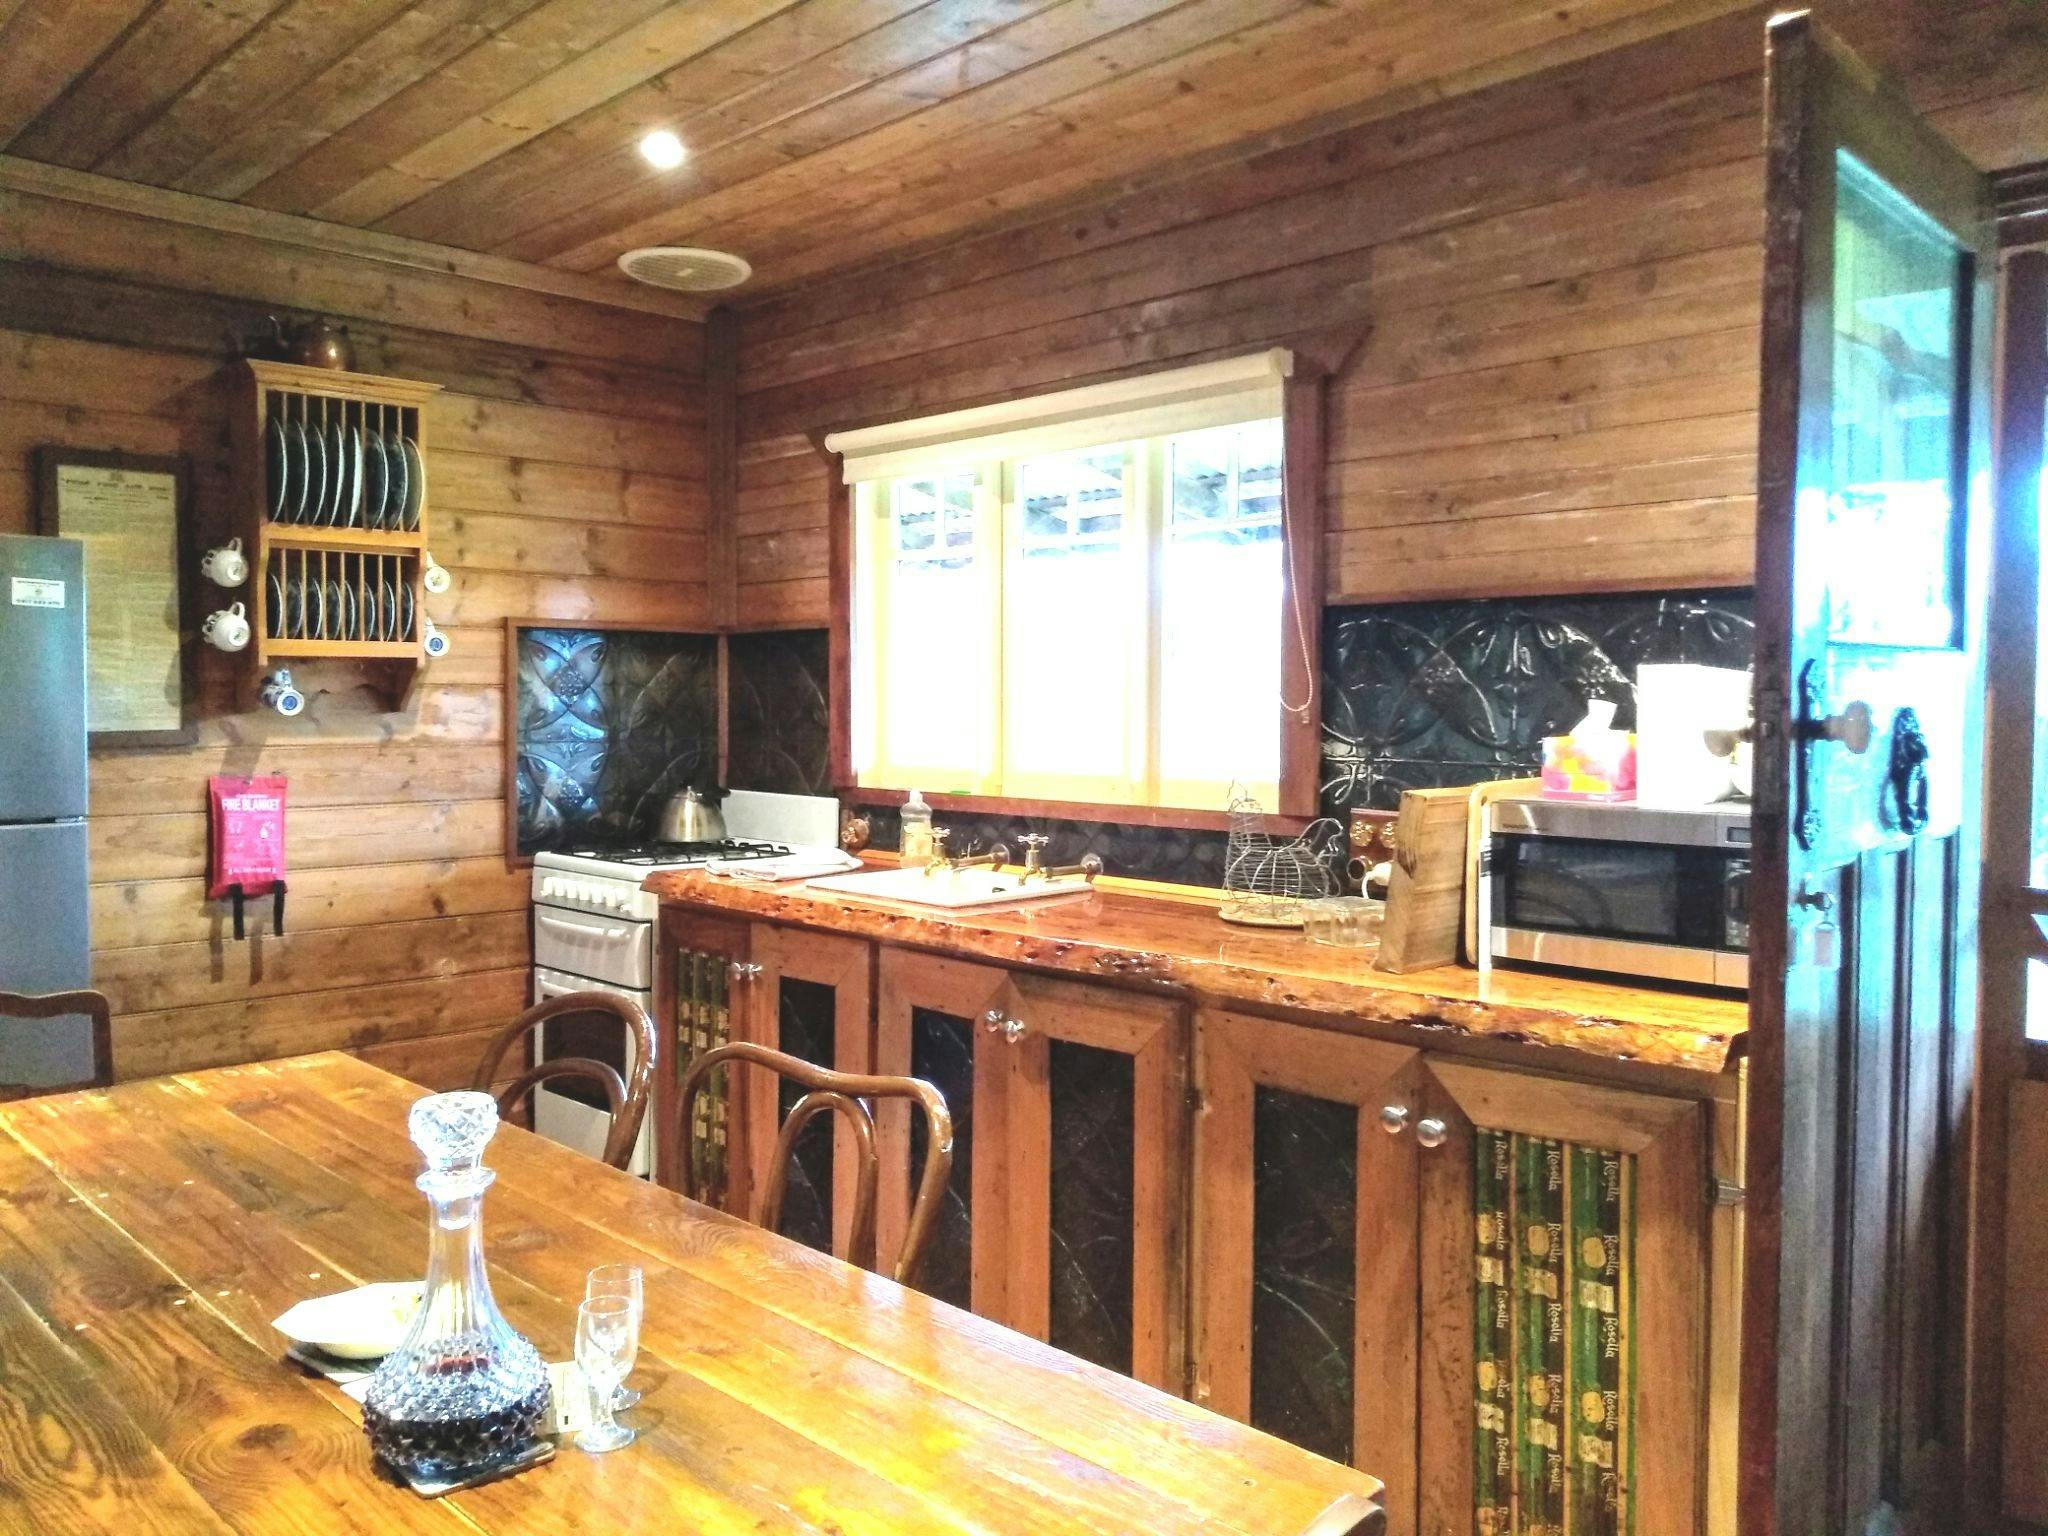 Orchard Cottage full kitchen in beautiful older country style with gorgeous woodwork